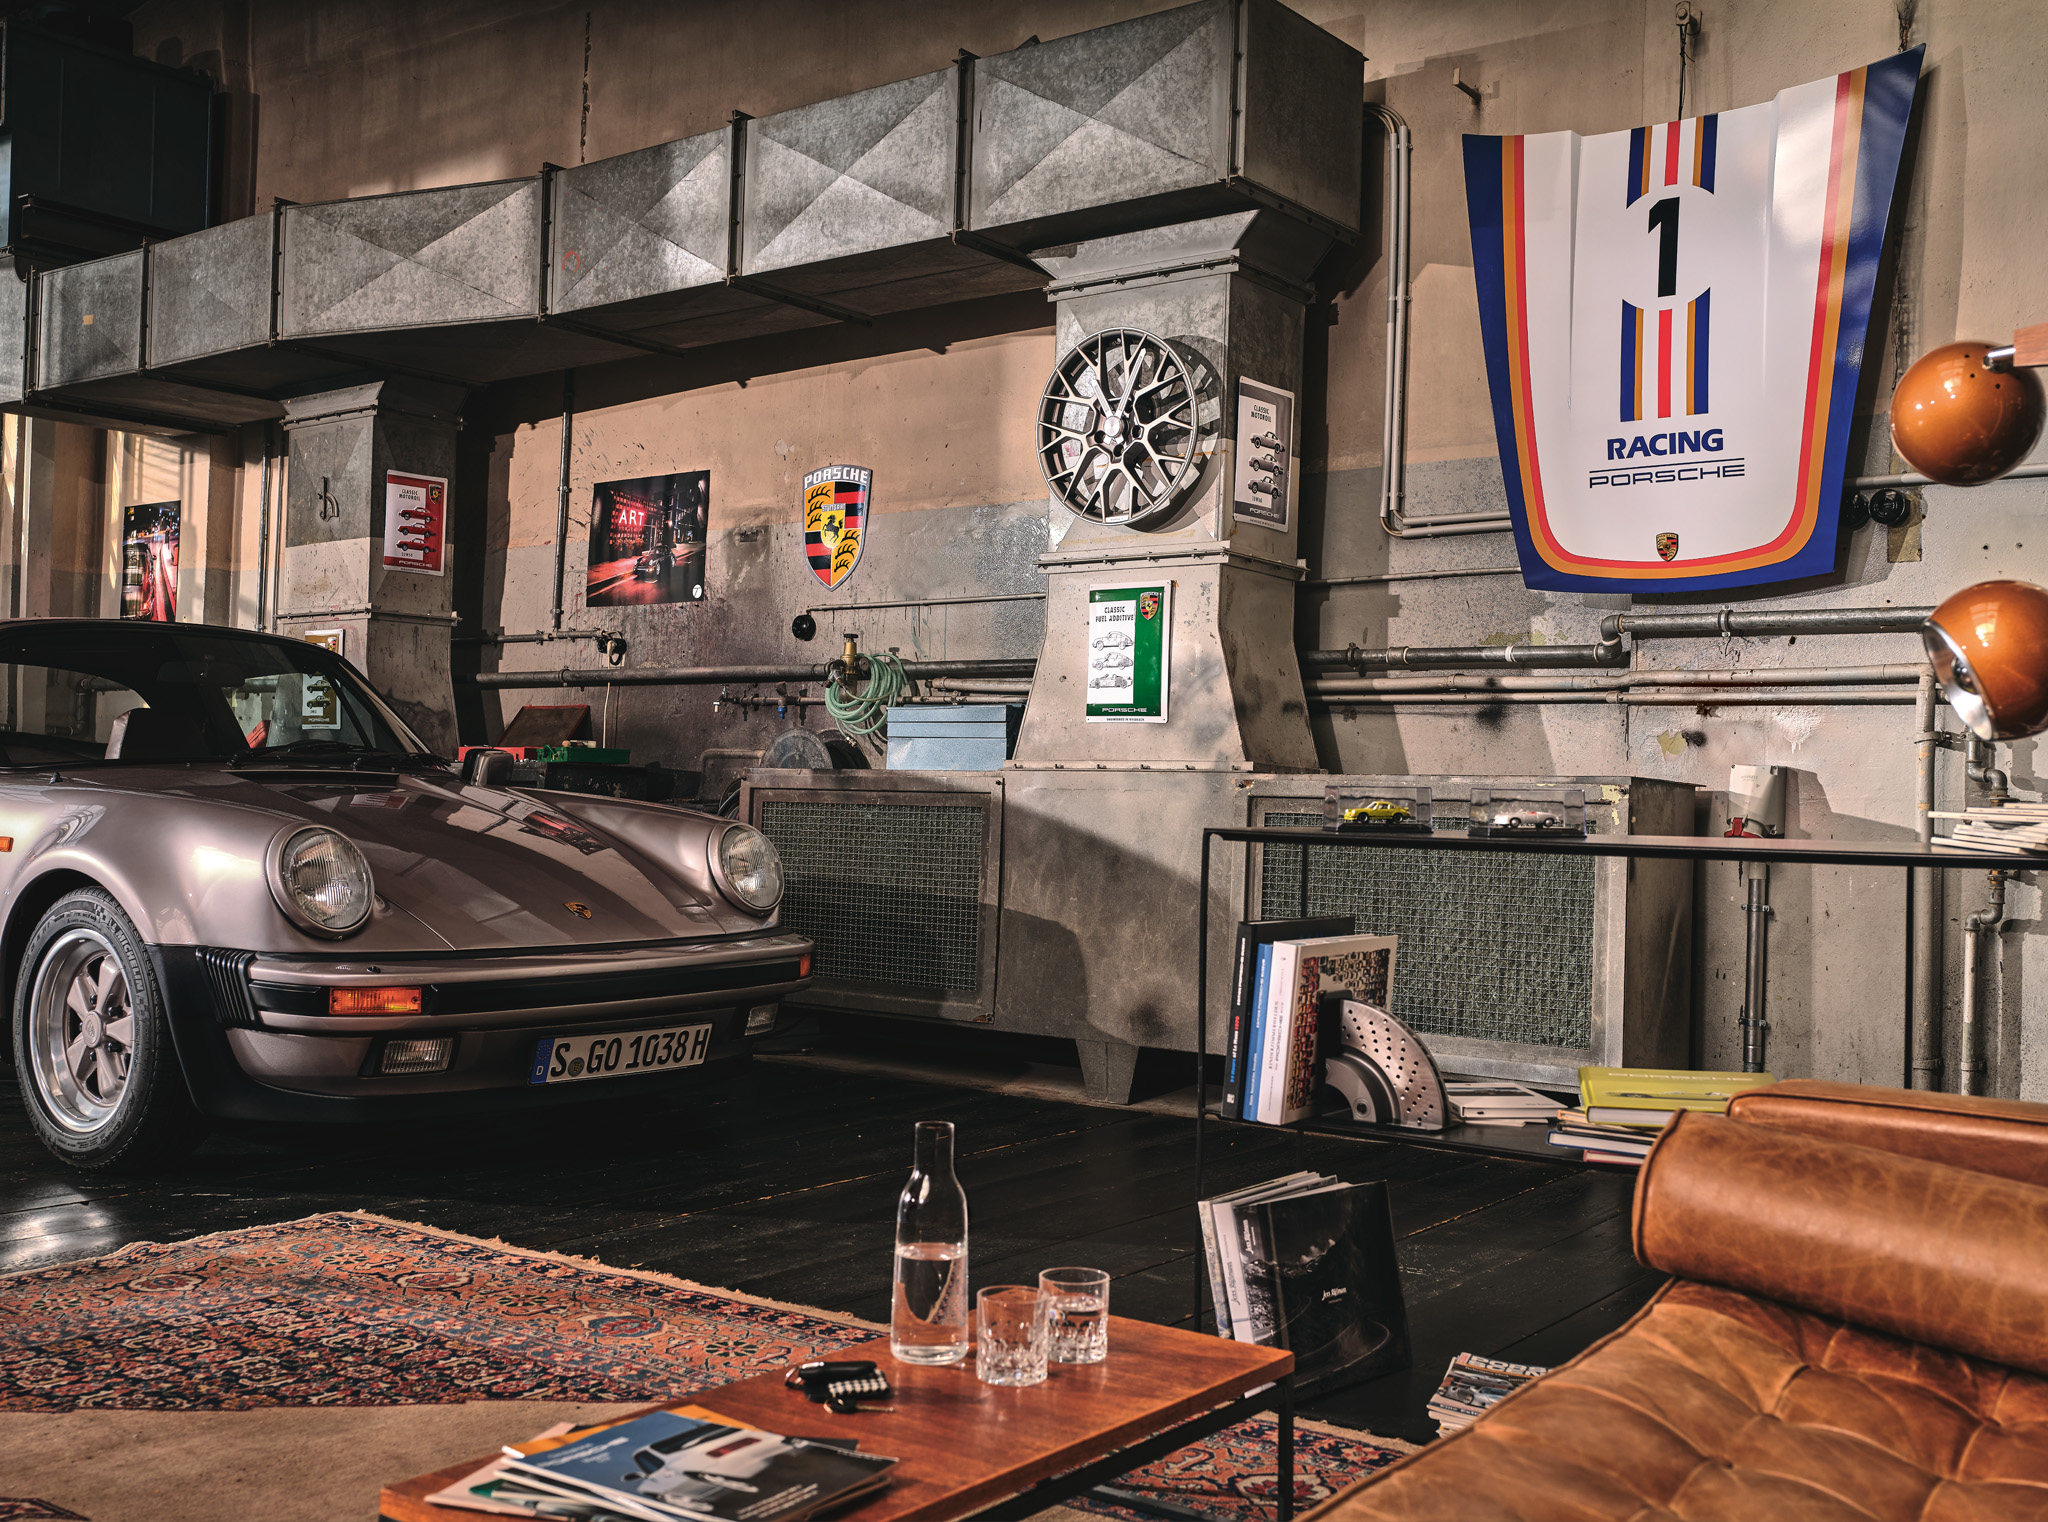 911 motorsport hood and classic Porsche in a sophisticated garage